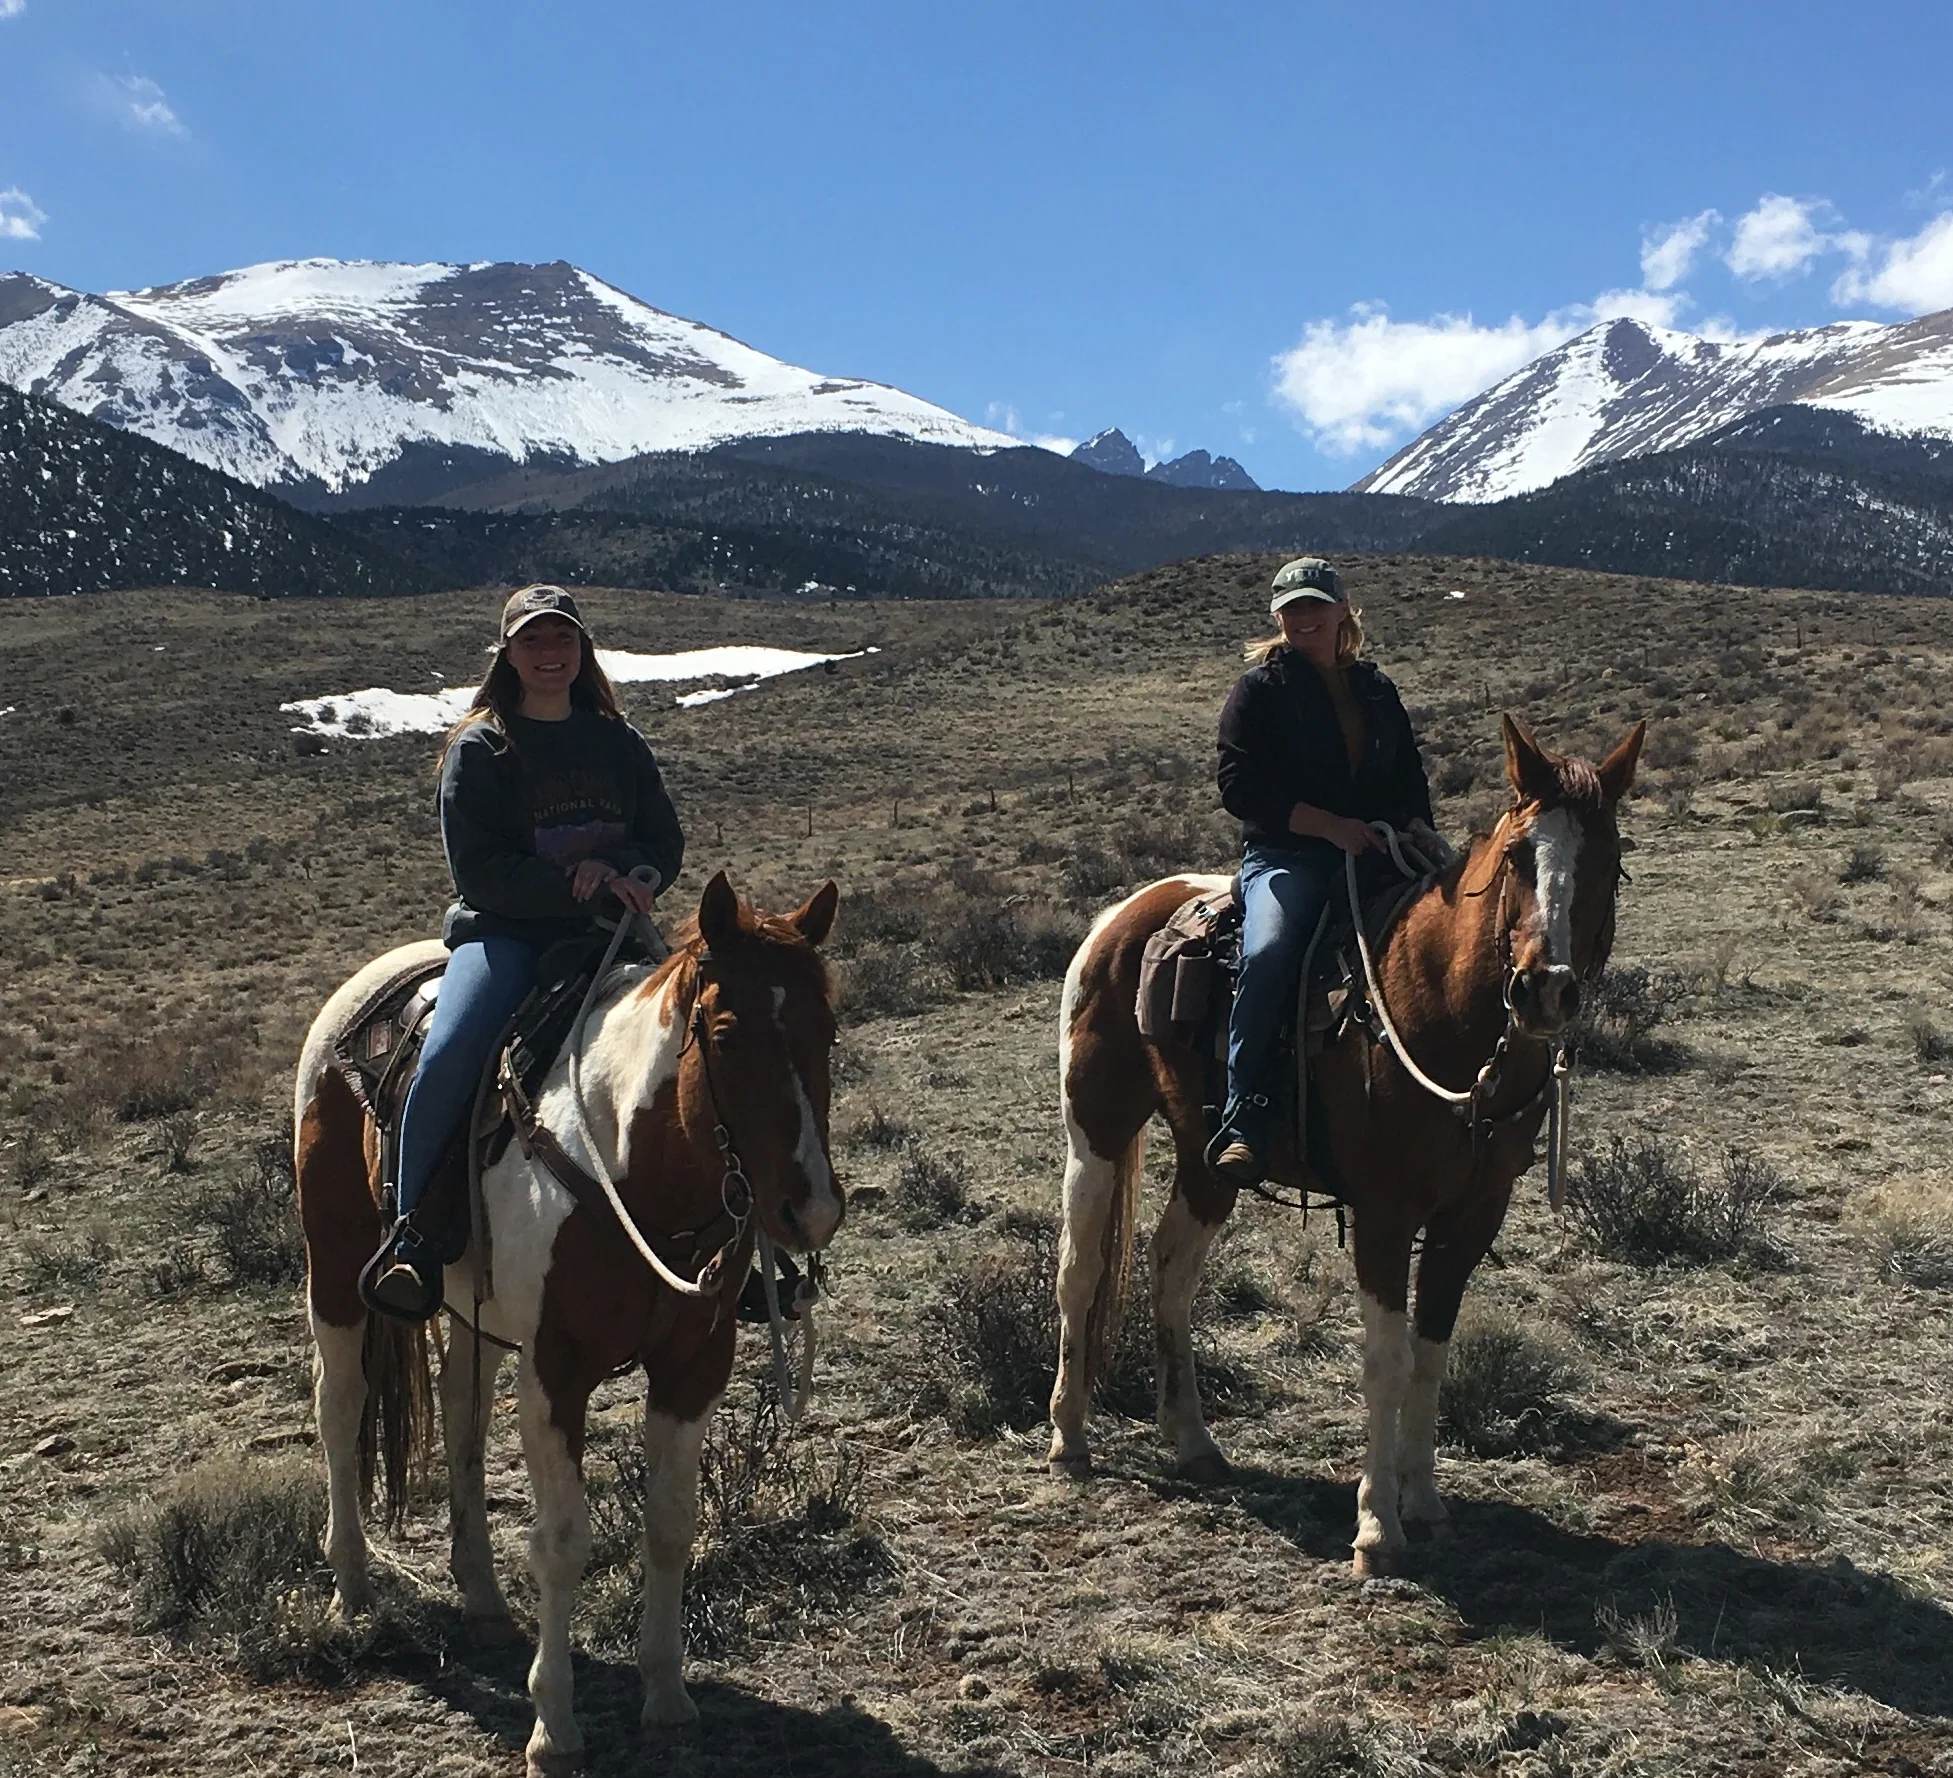 two women sitting on horseback at the base of snowcapped mountains in colorado